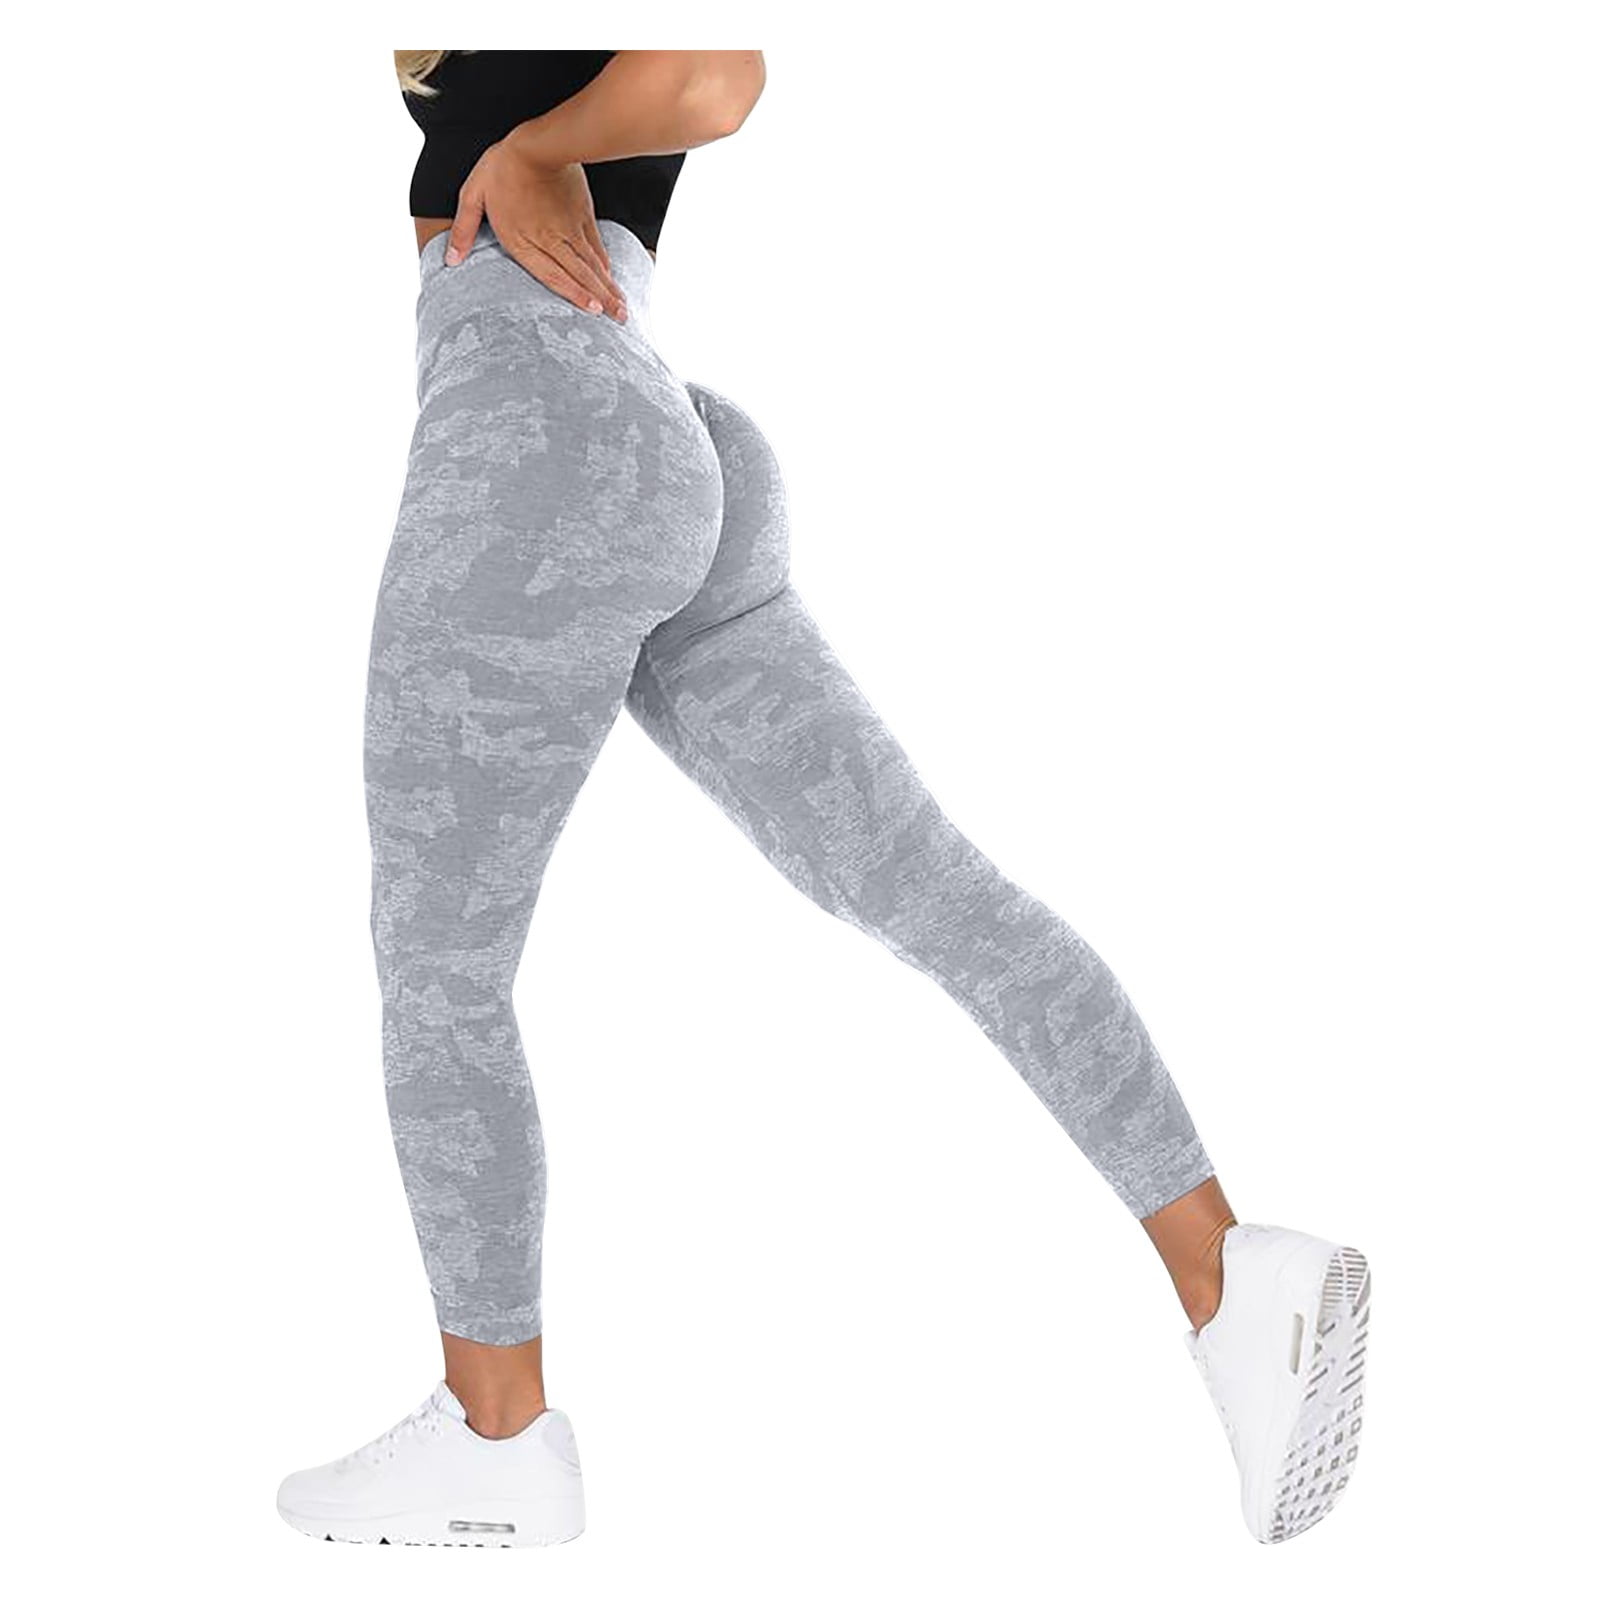  High Waisted Leggings For Women - Soft Athletic Tummy Control  Pants For Running Cycling Yoga Workout - Reg & Plus Size